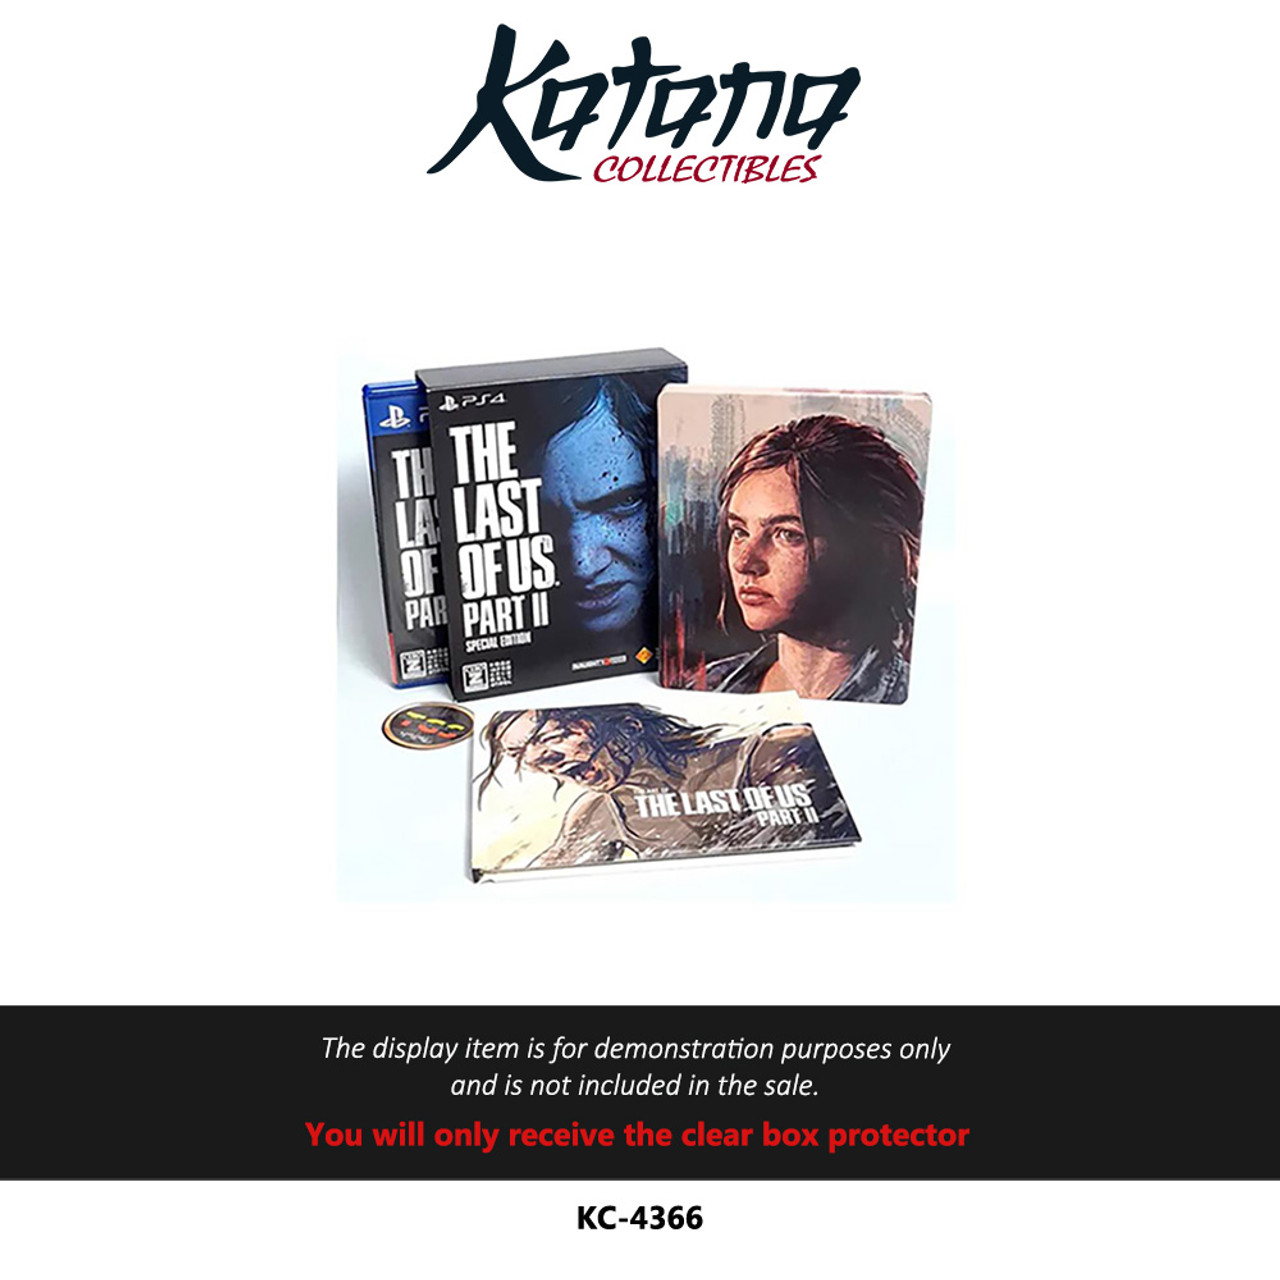 Katana Collectibles Protector For The Last of Us Part II Special Edition